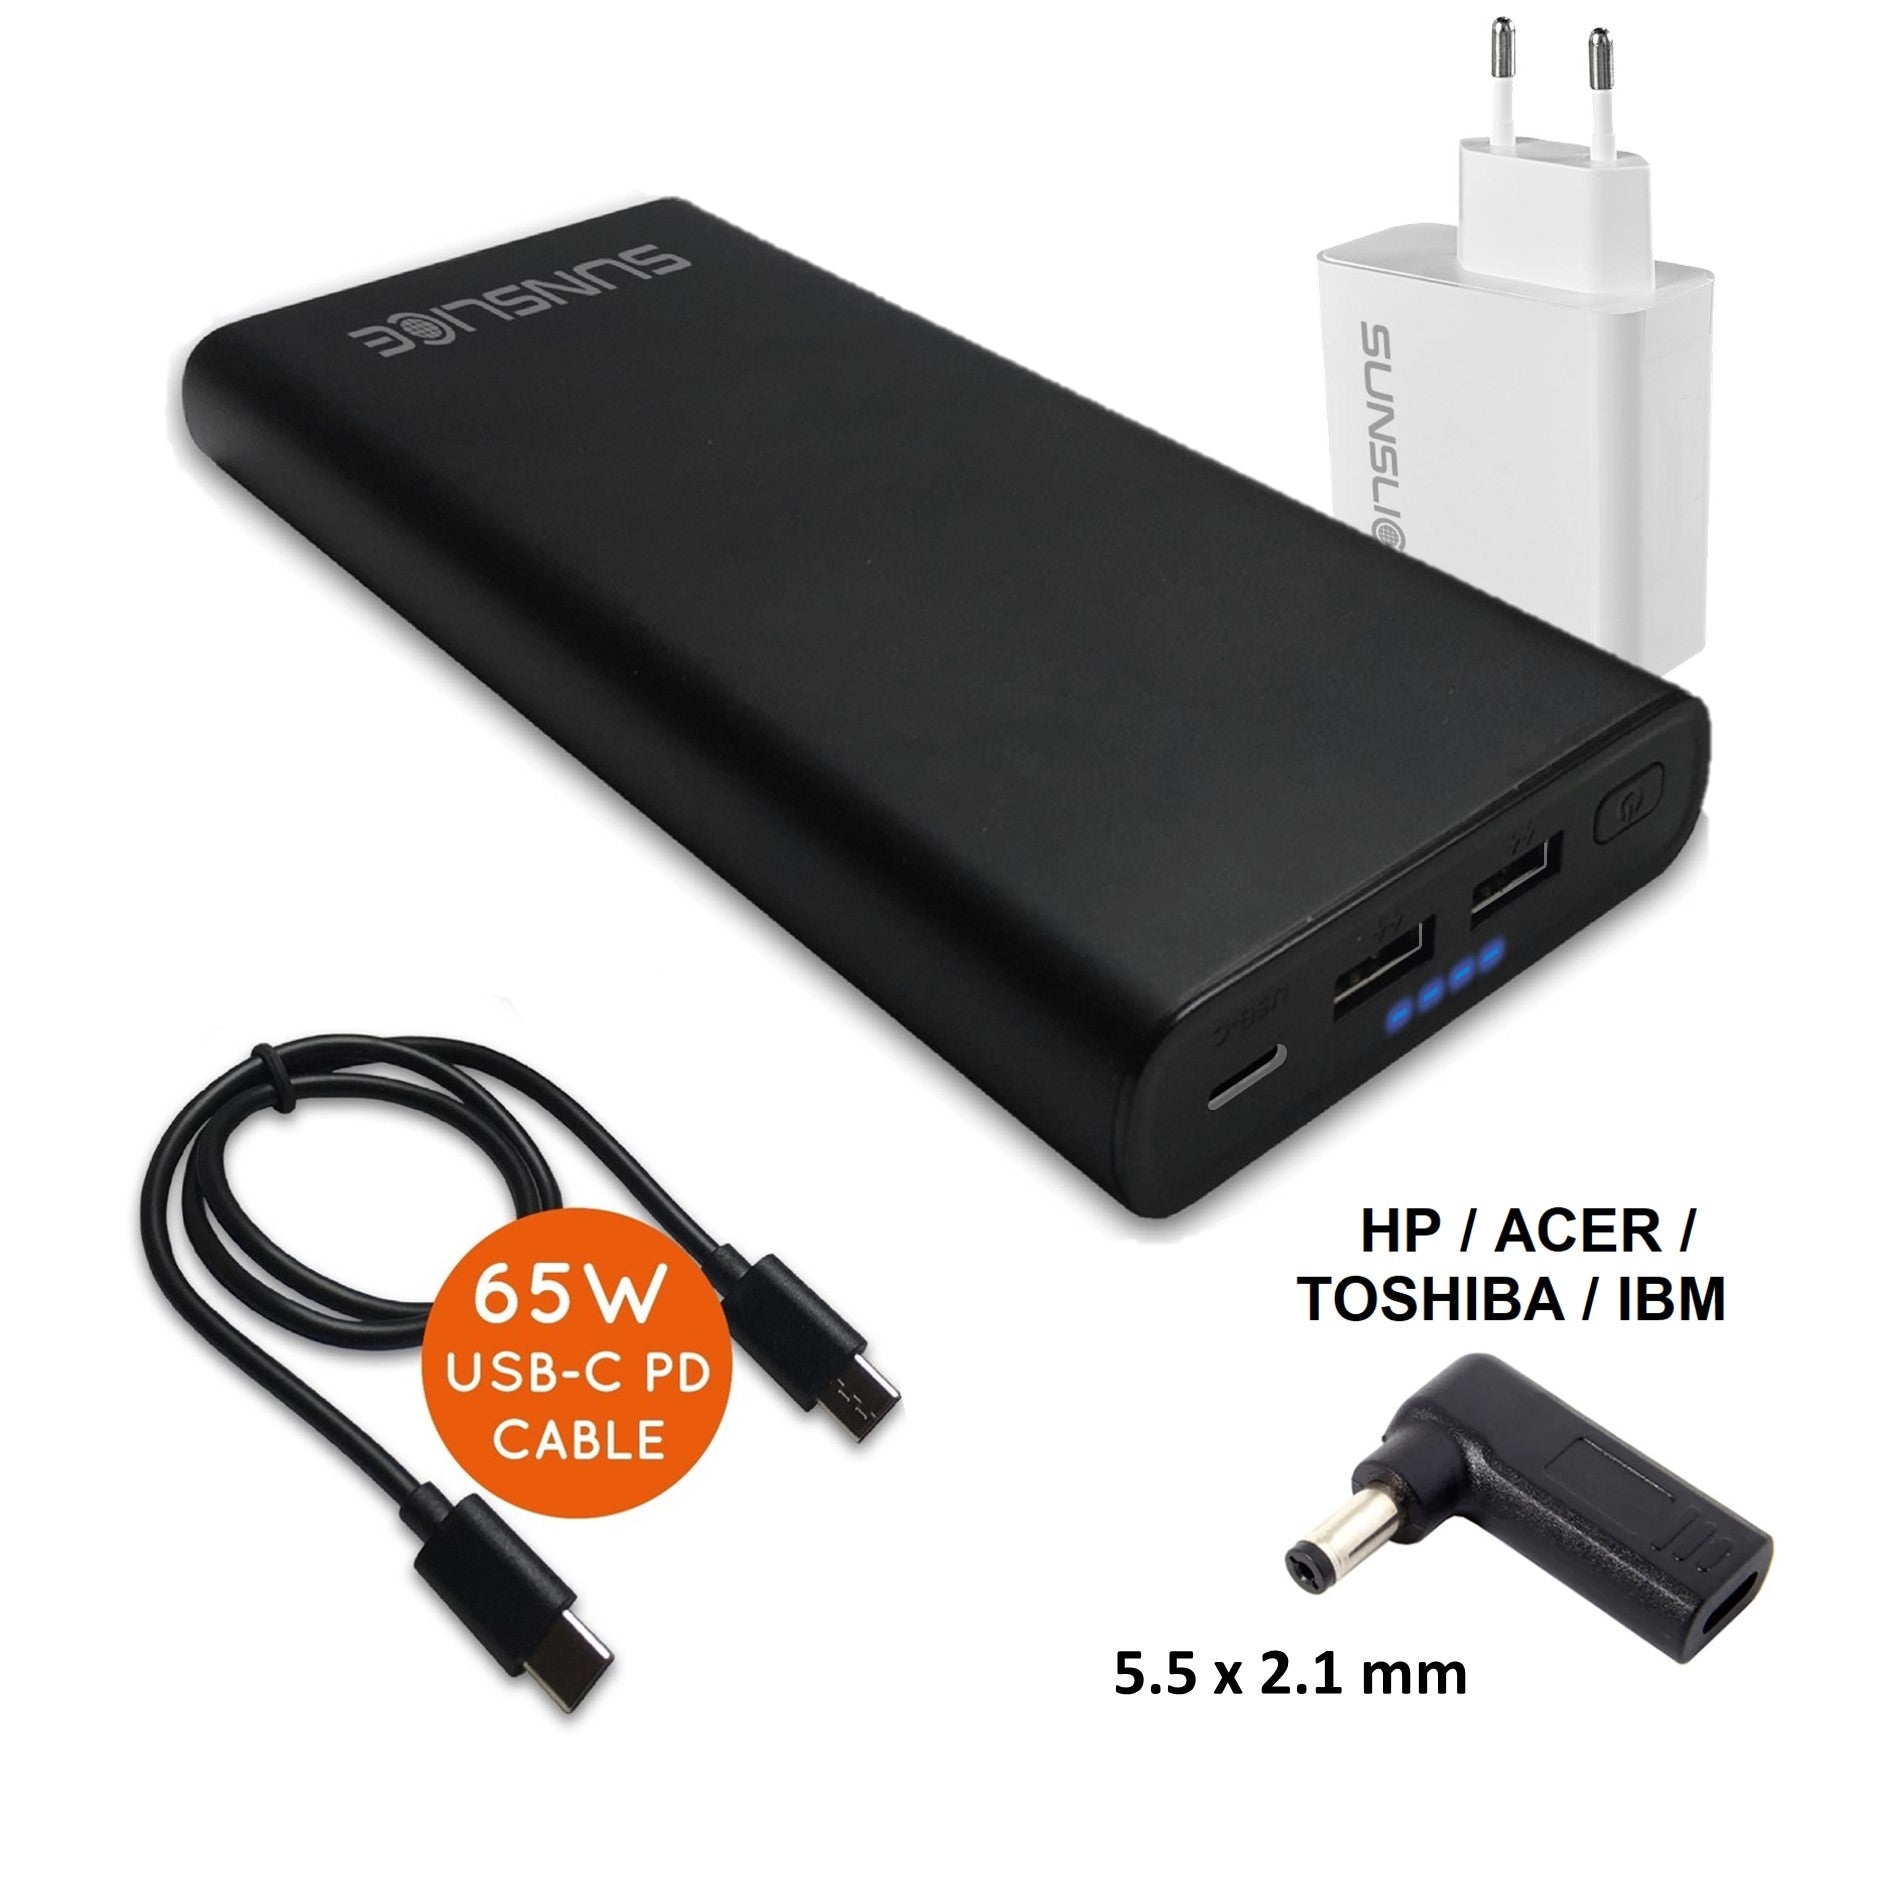 100w PD Laptop Power Bank For Google